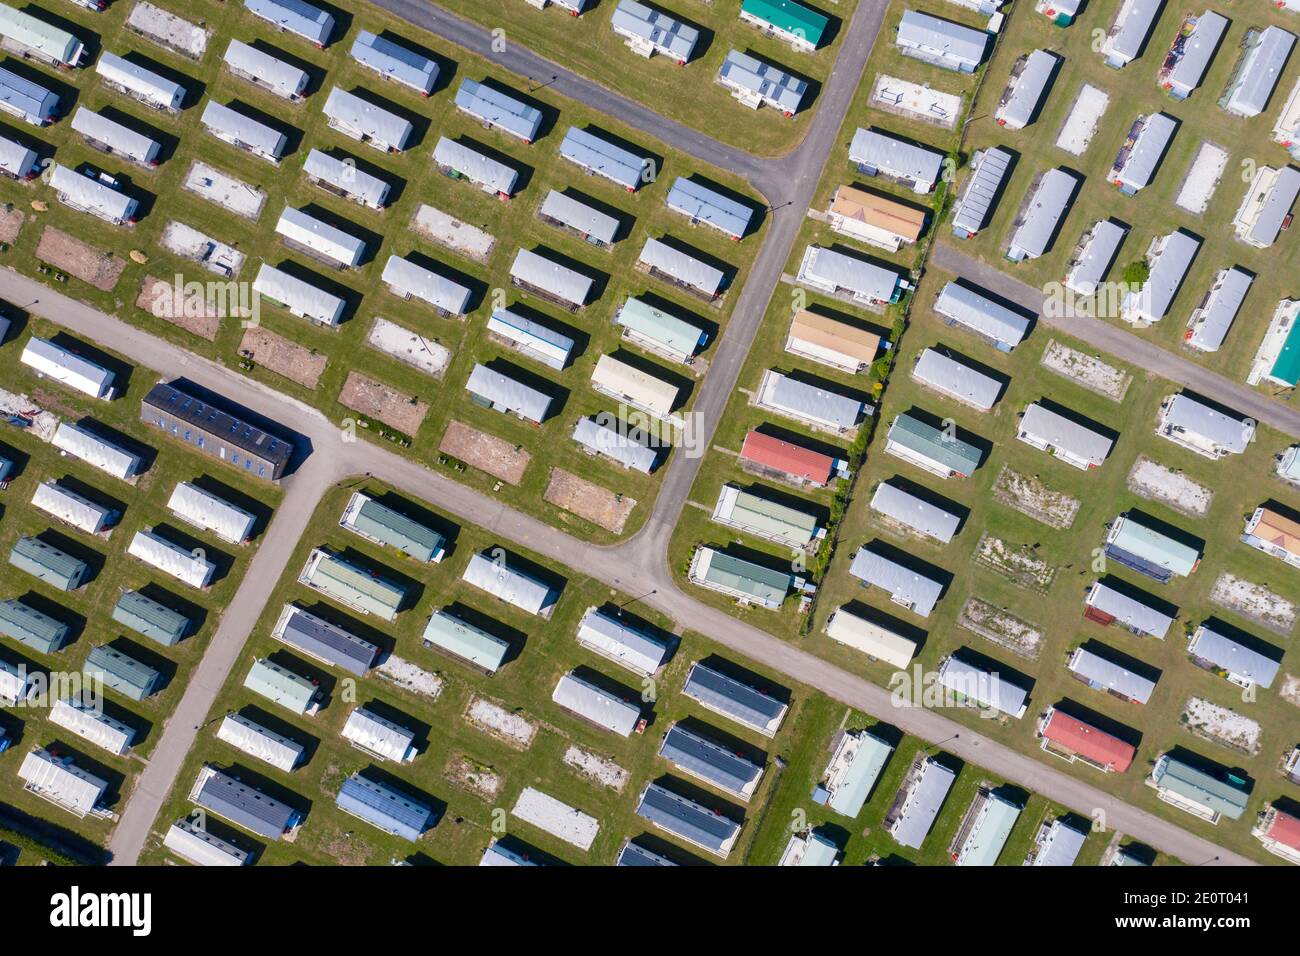 Aerial photo showing a top down view of caravans and the caravan camping resort site located in the British village of Skegness in Ingoldmells East Yo Stock Photo